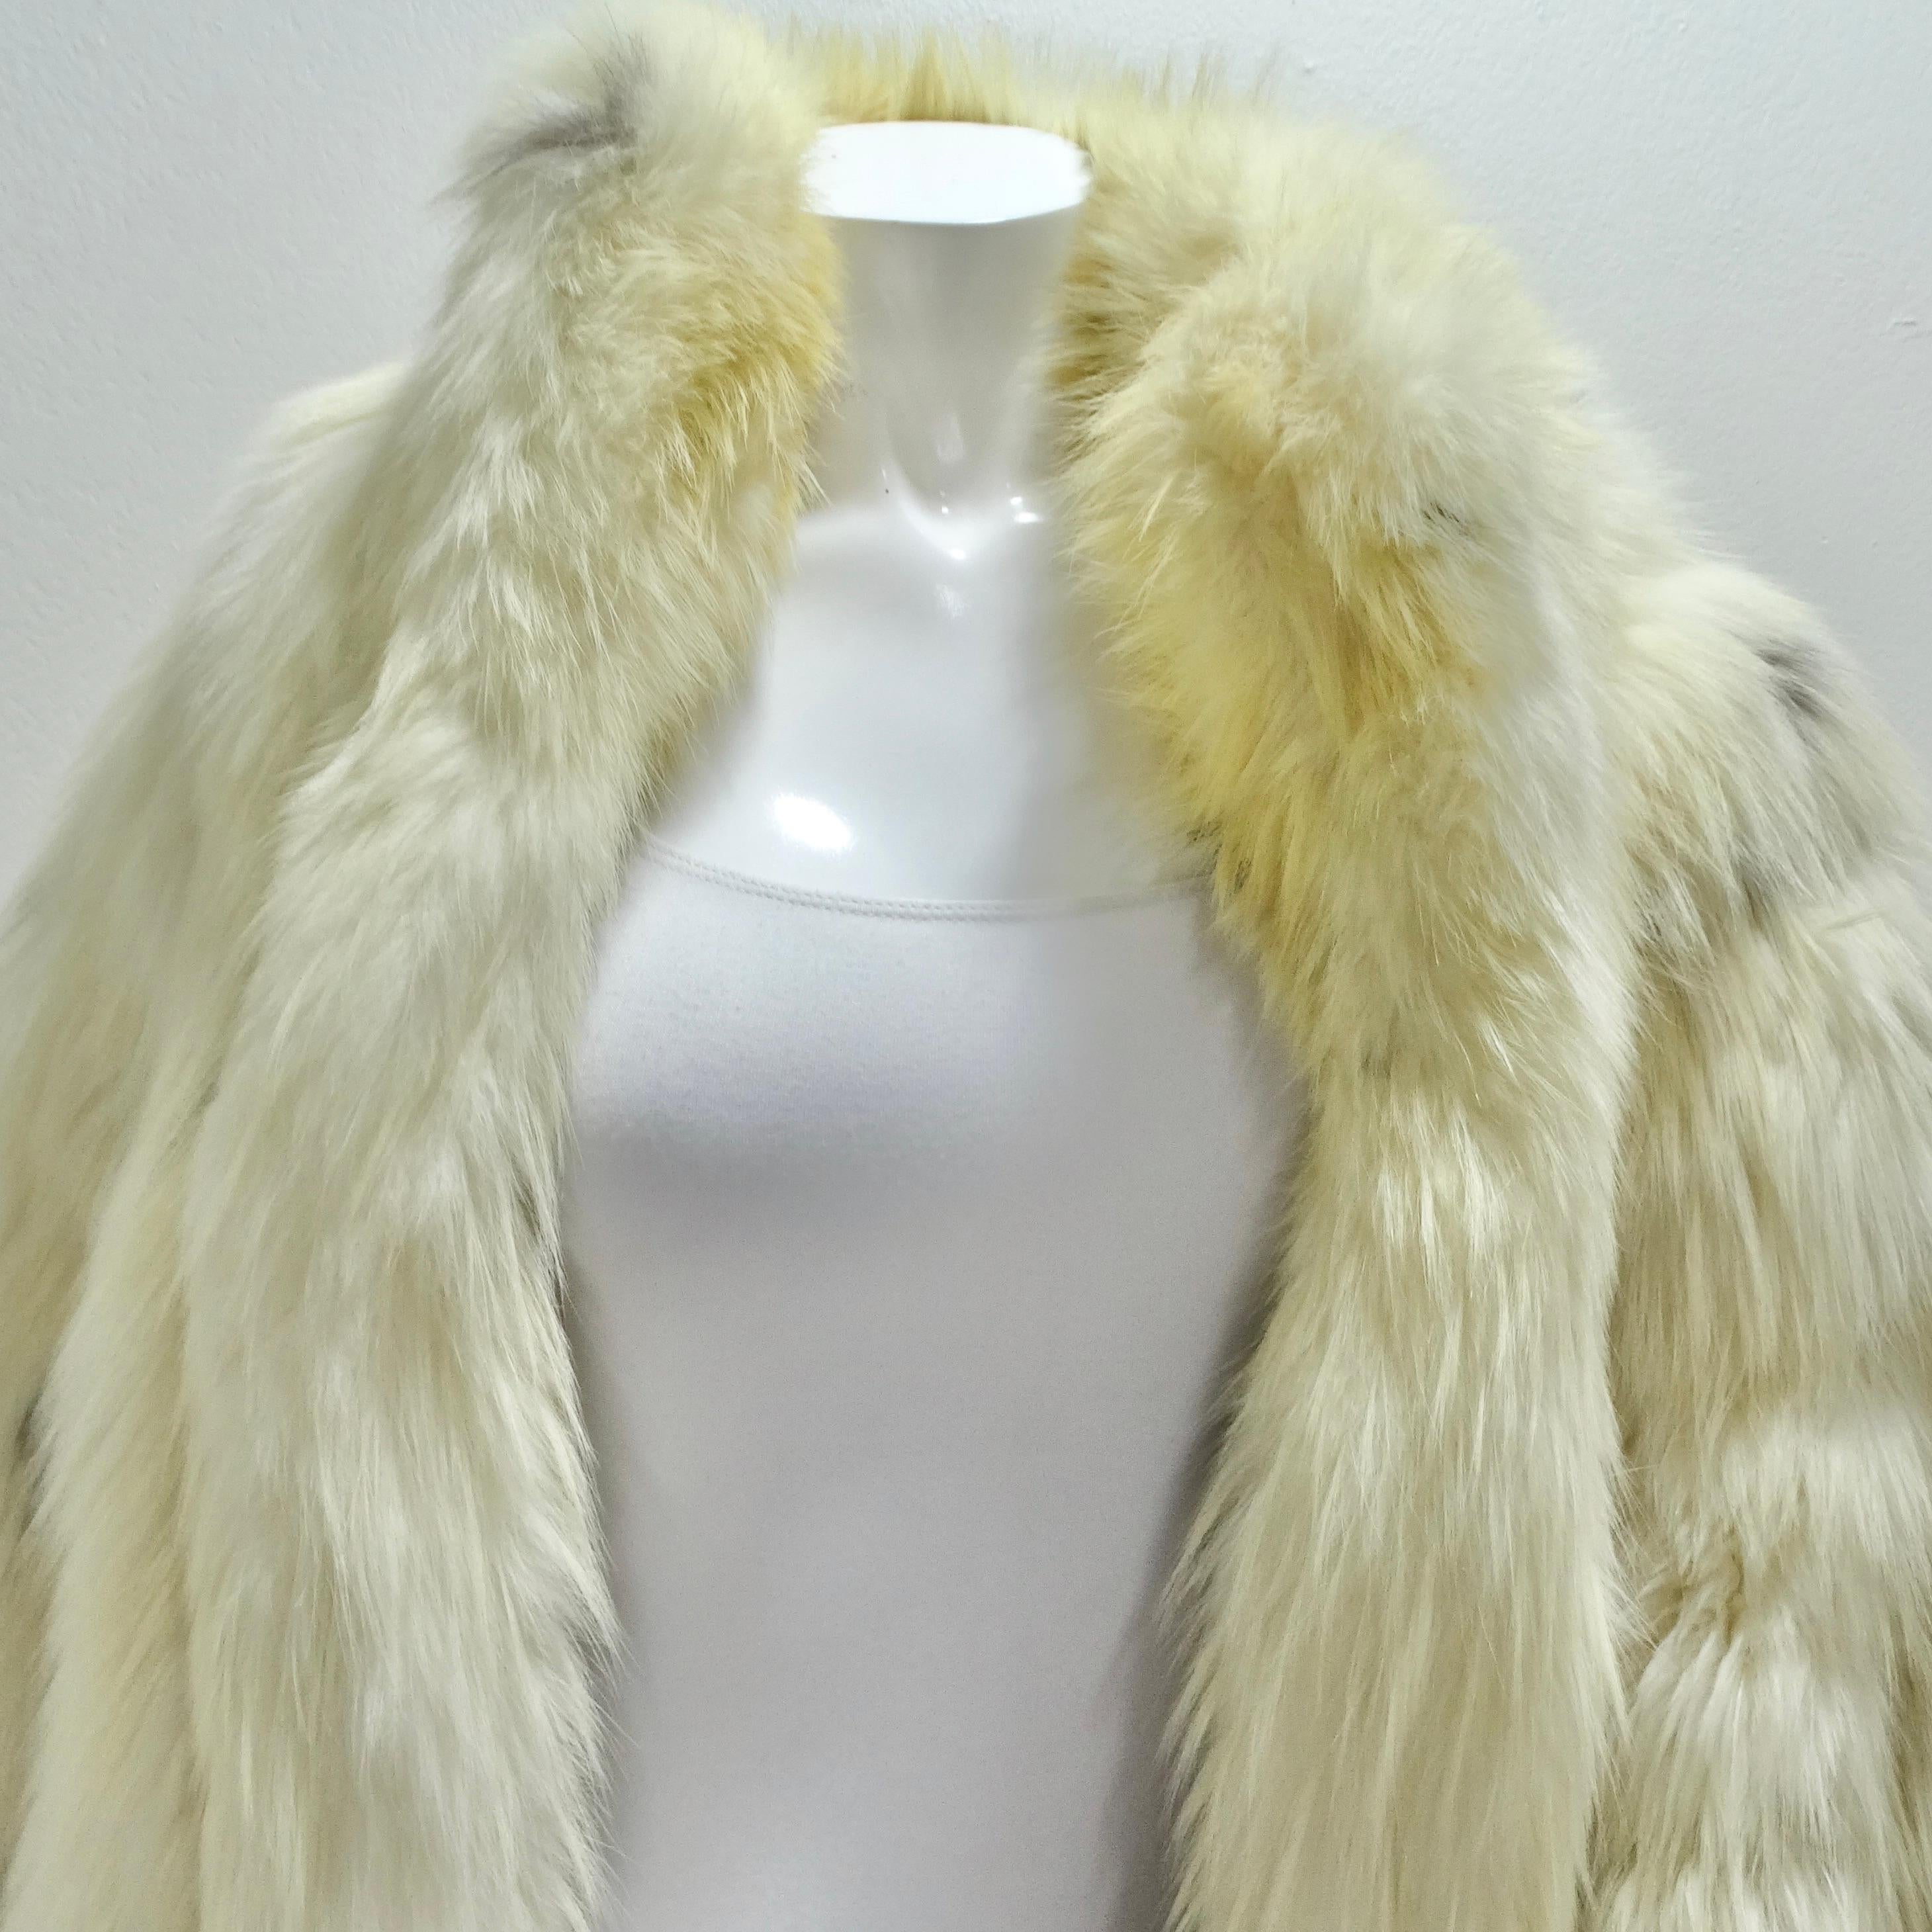 Christian Dior 1970s Fox Fur Coat In Good Condition For Sale In Scottsdale, AZ